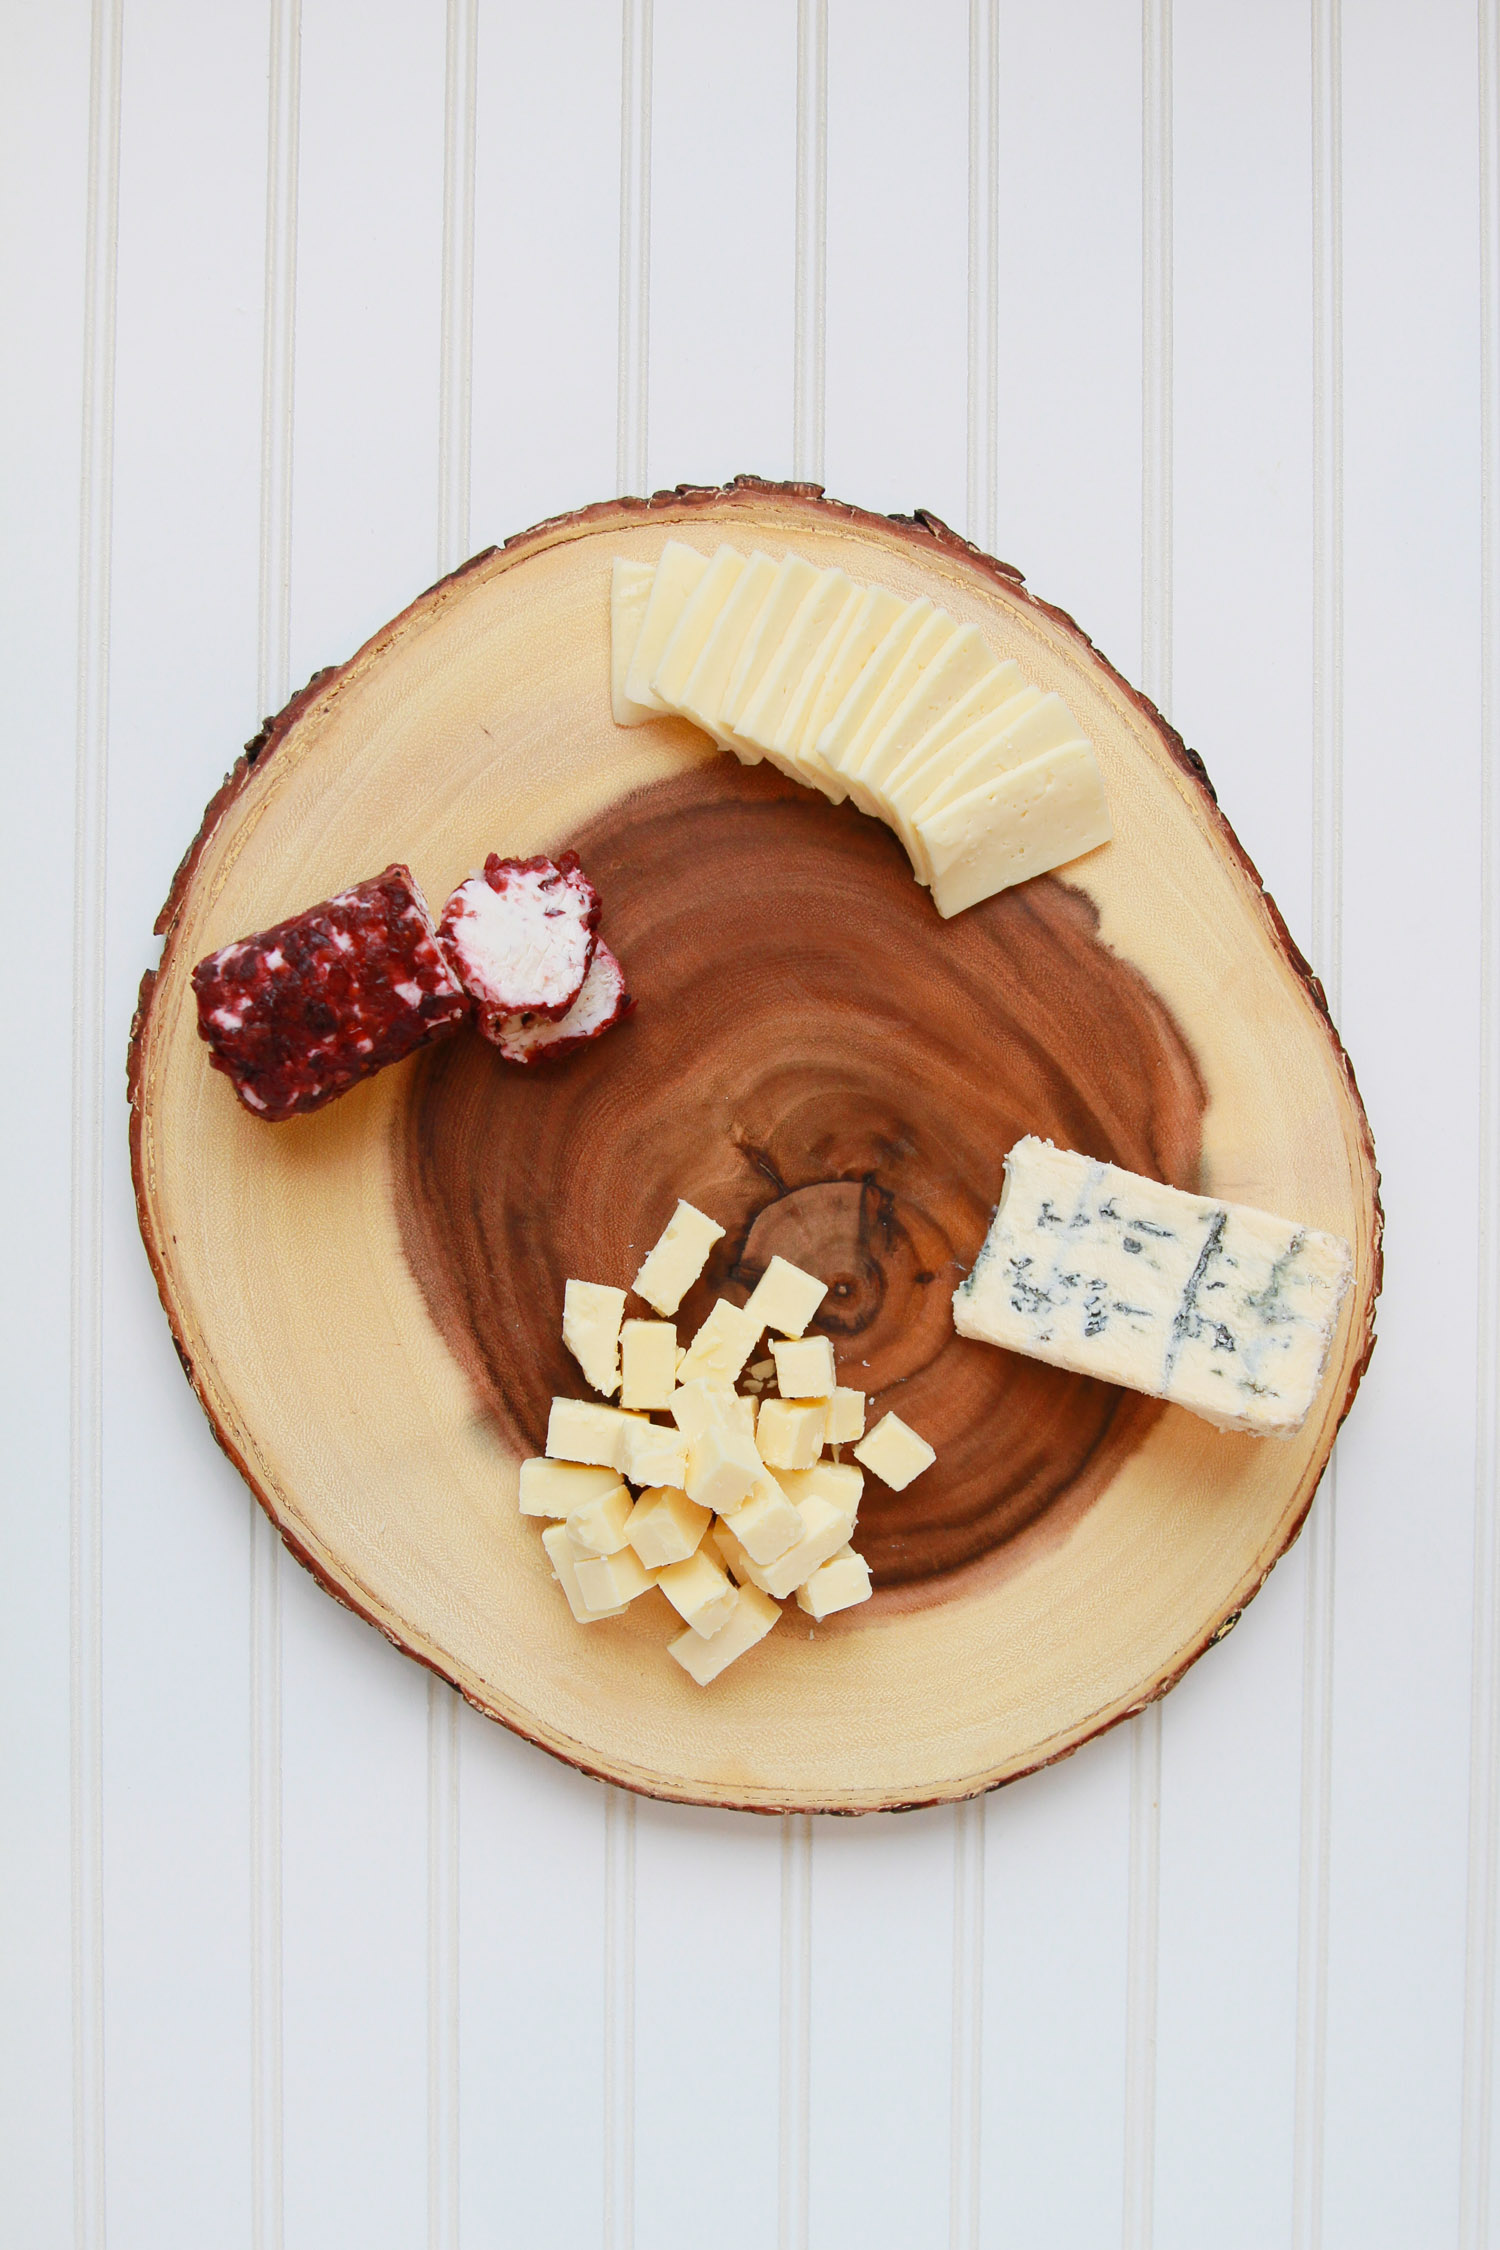 5 Steps to Building the Perfect Holiday Cheese Board